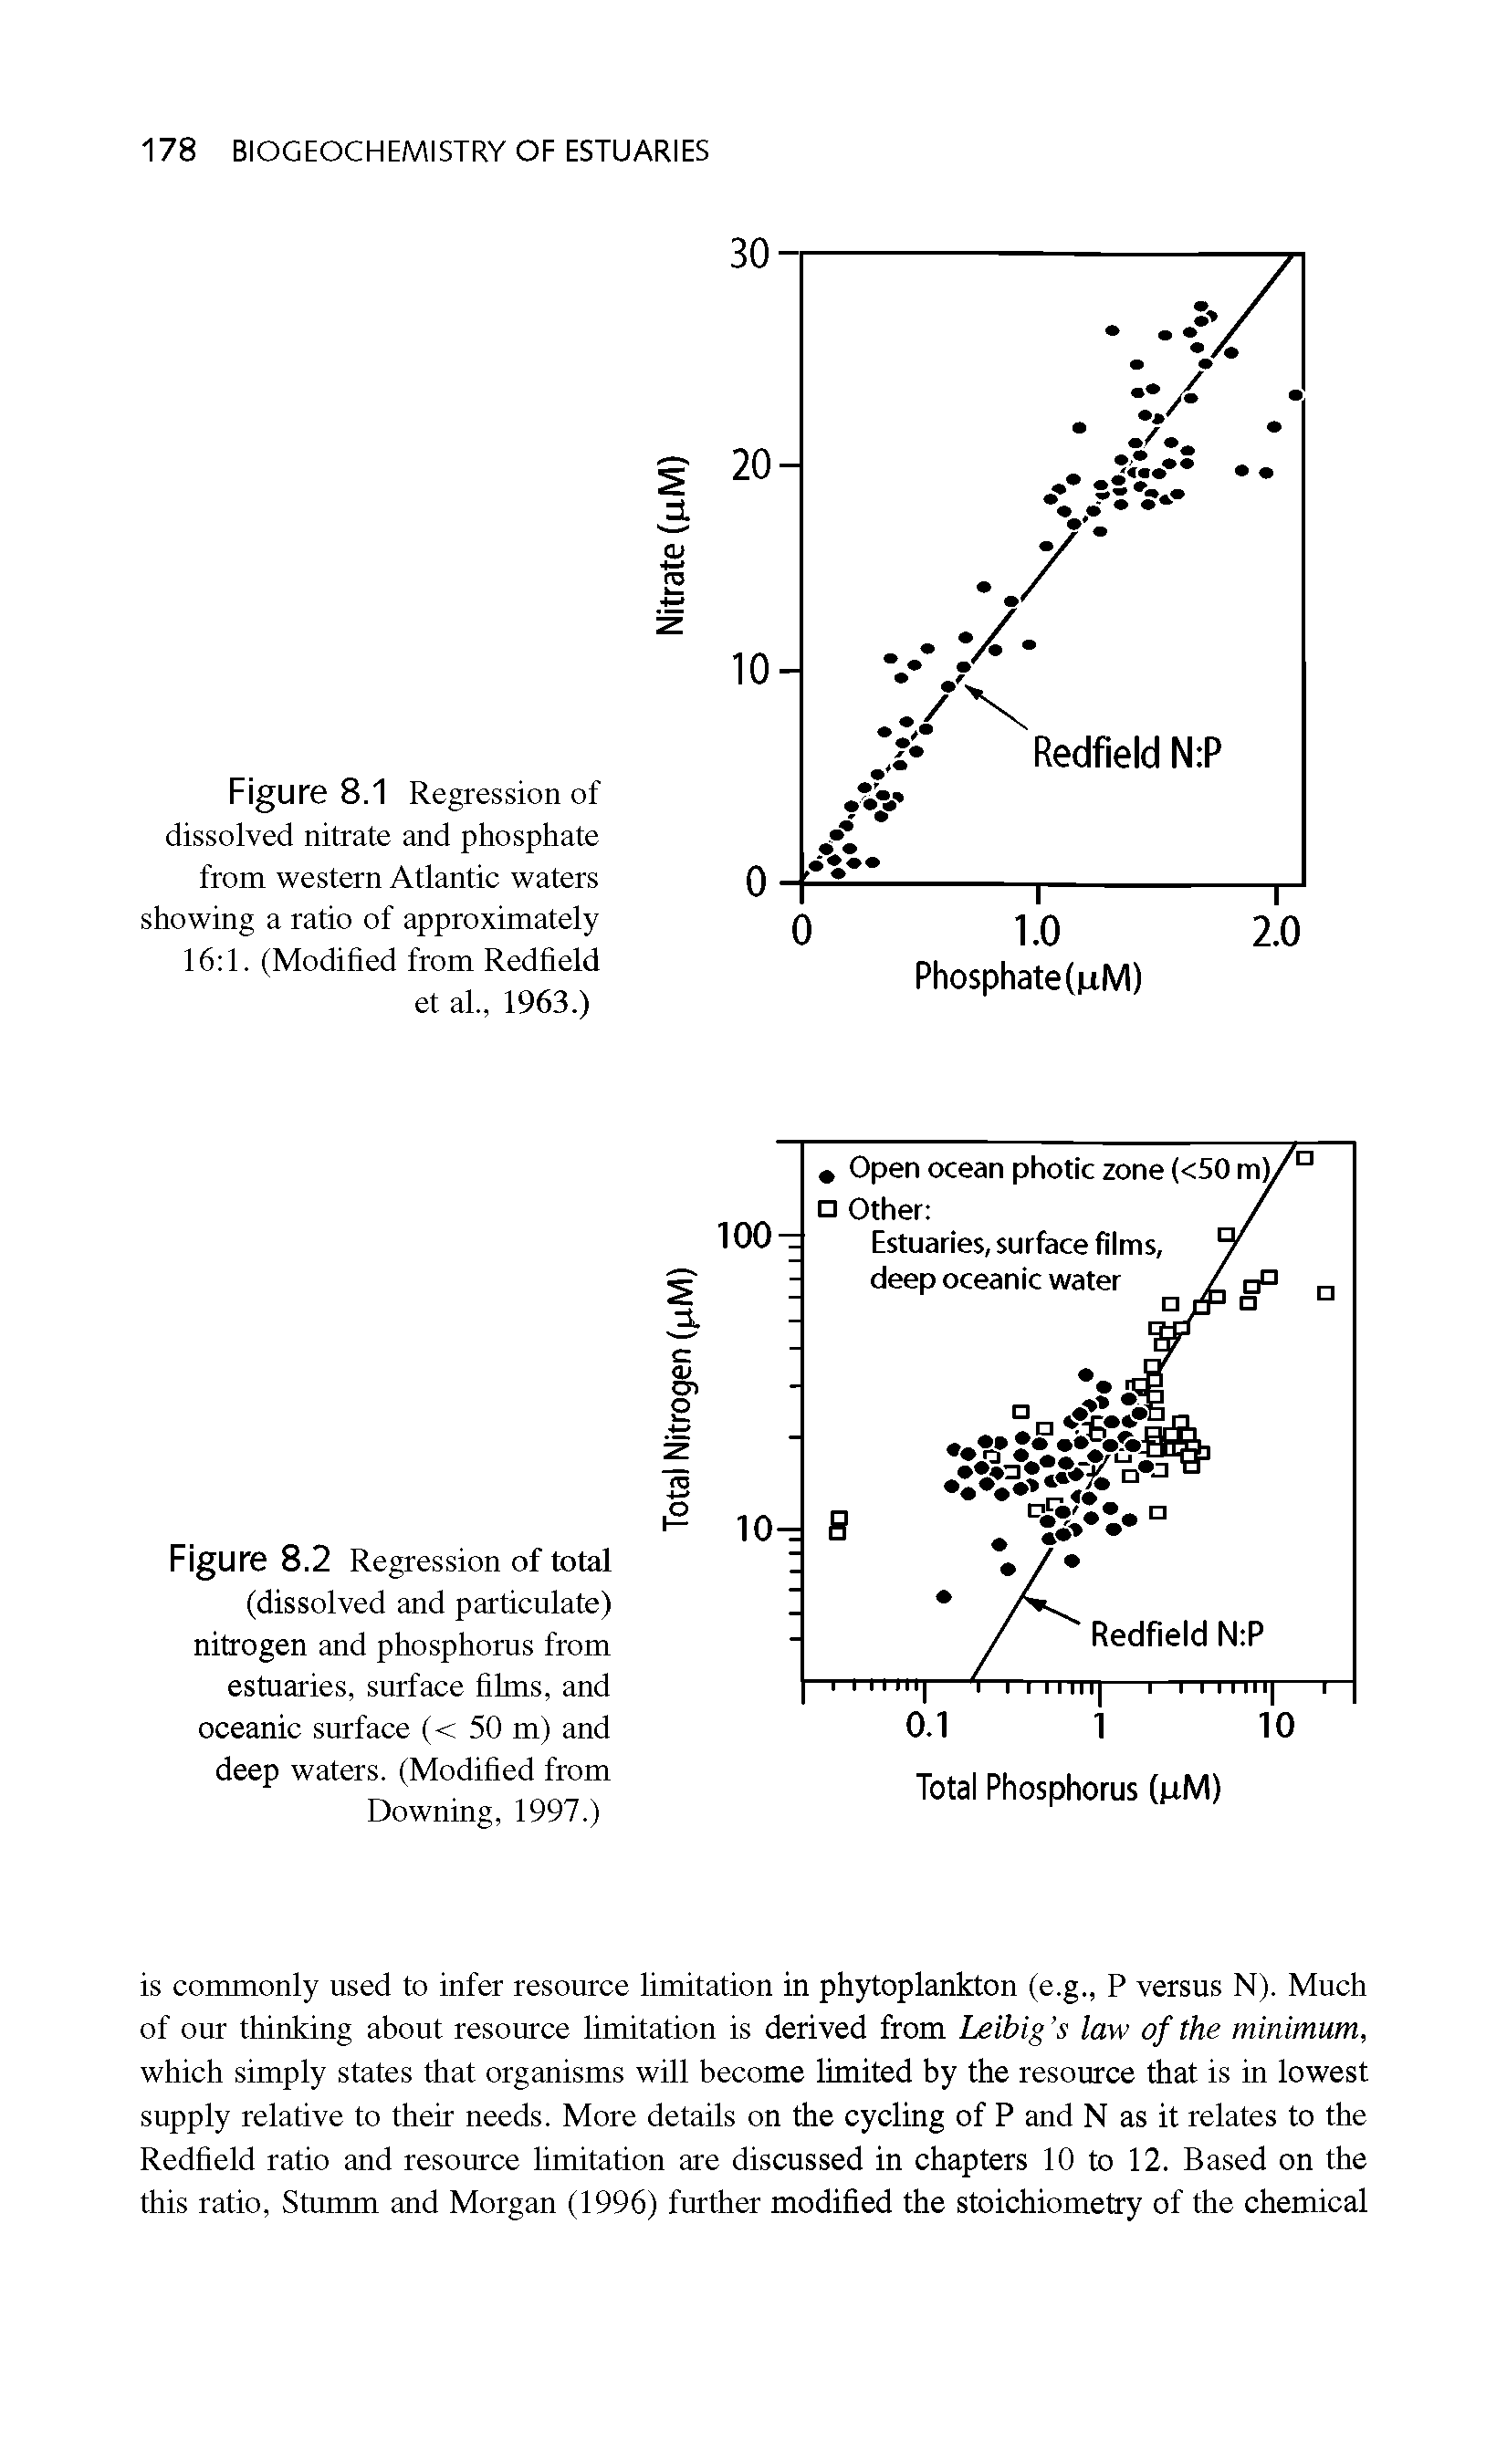 Figure 8.2 Regression of total (dissolved and particulate) nitrogen and phosphorus from estuaries, surface films, and oceanic surface (< 50 m) and deep waters. (Modified from Downing, 1997.)...